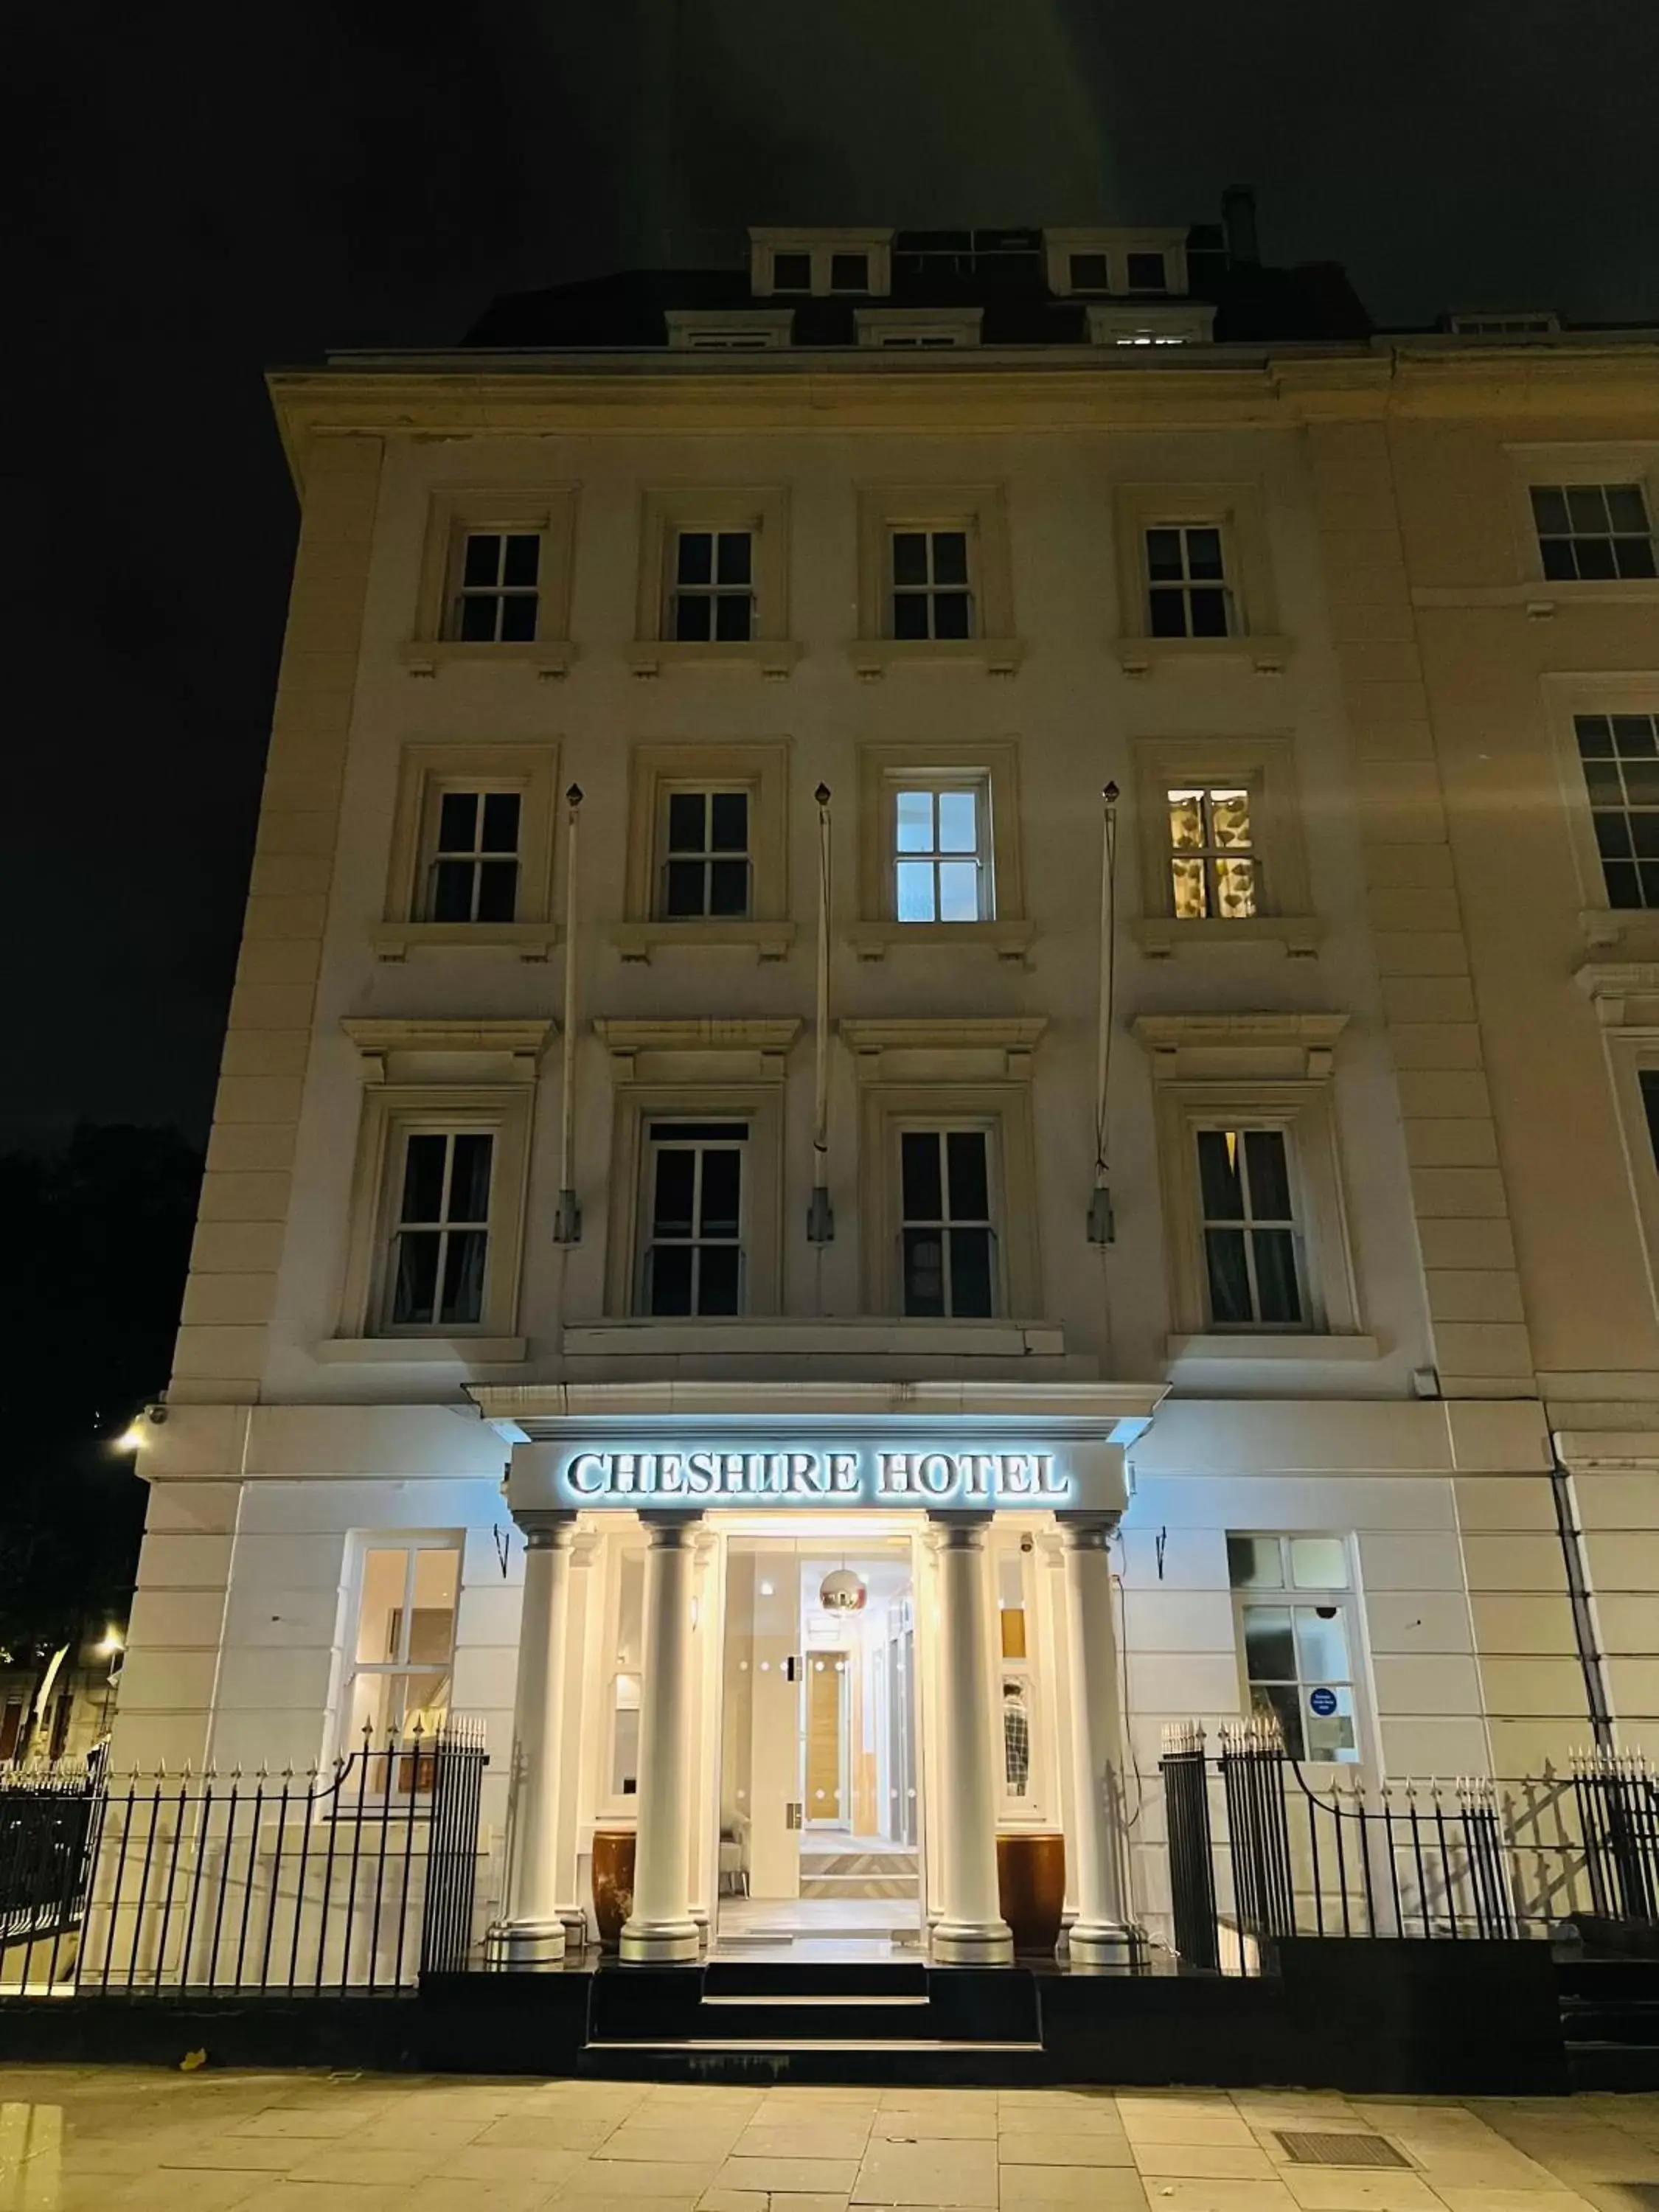 Property Building in Cheshire Hotel Central London